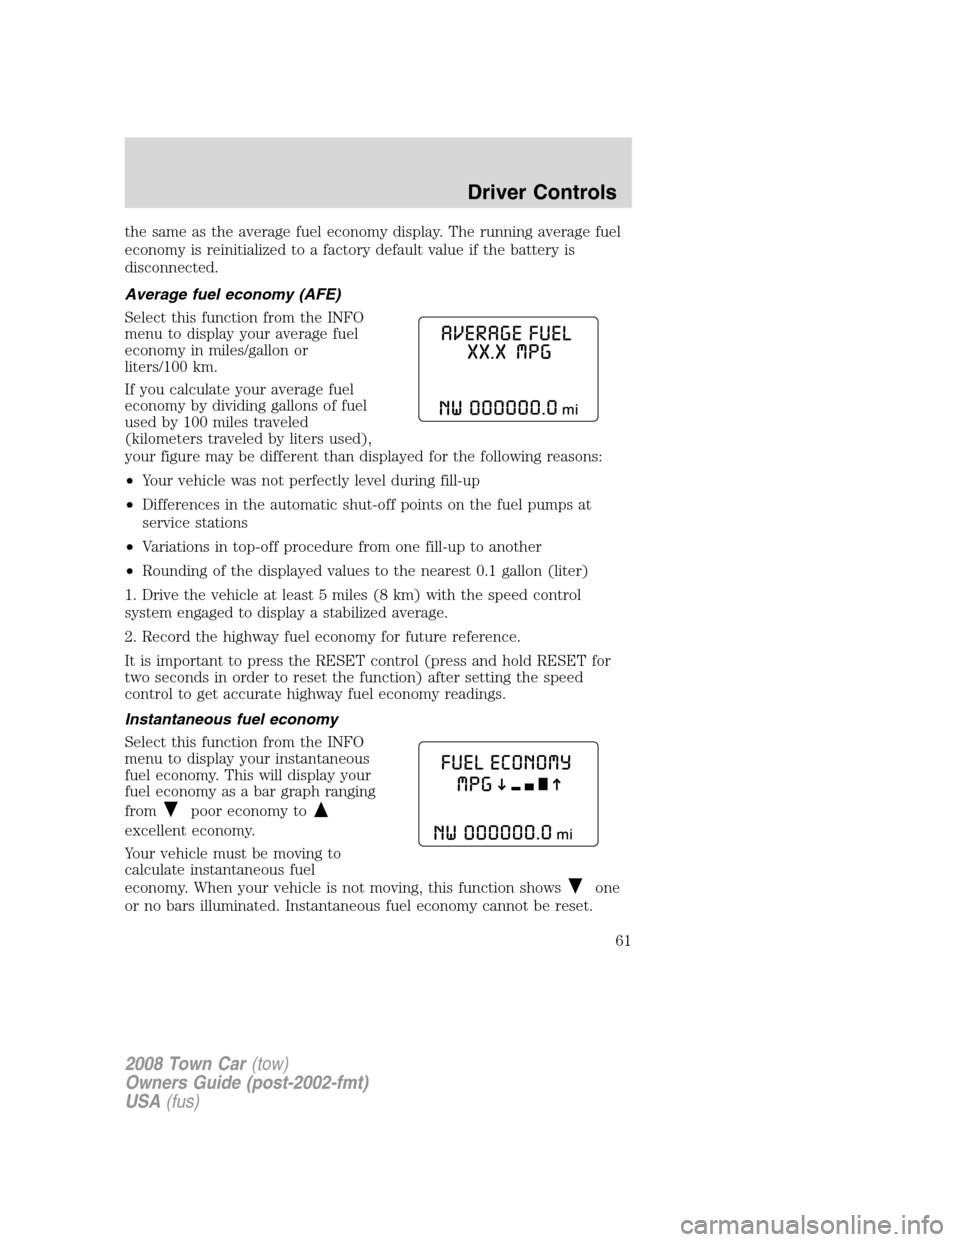 LINCOLN TOWN CAR 2008  Owners Manual the same as the average fuel economy display. The running average fuel
economy is reinitialized to a factory default value if the battery is
disconnected.
Average fuel economy (AFE)
Select this functi